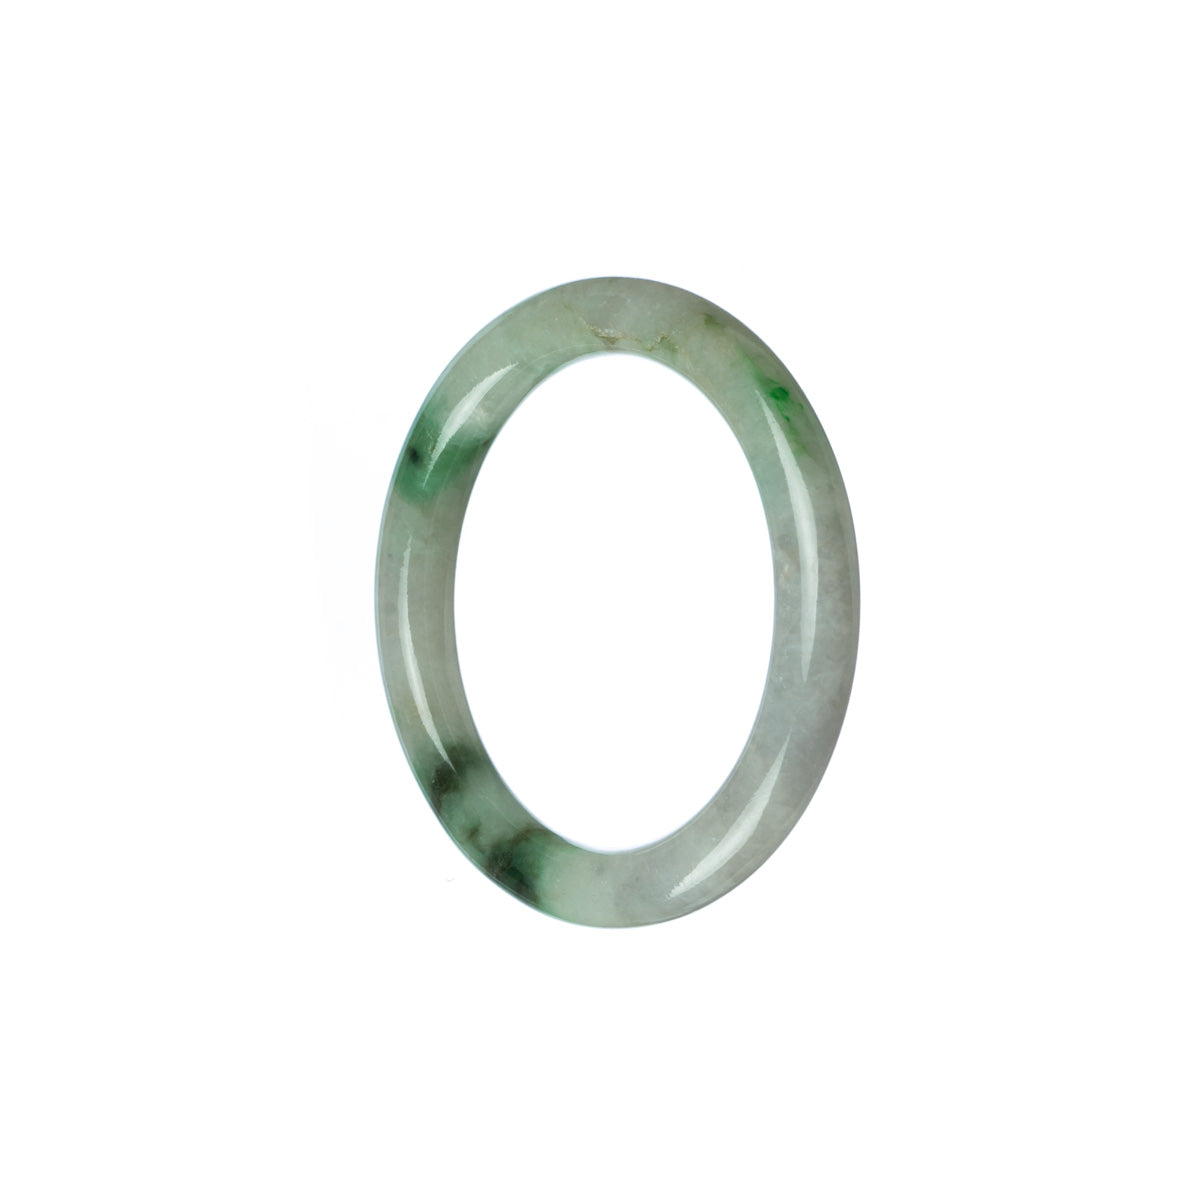 An elegant and delicate green and white jade bangle with a round shape, specifically designed for children. Perfect for adding a touch of sophistication to any outfit.